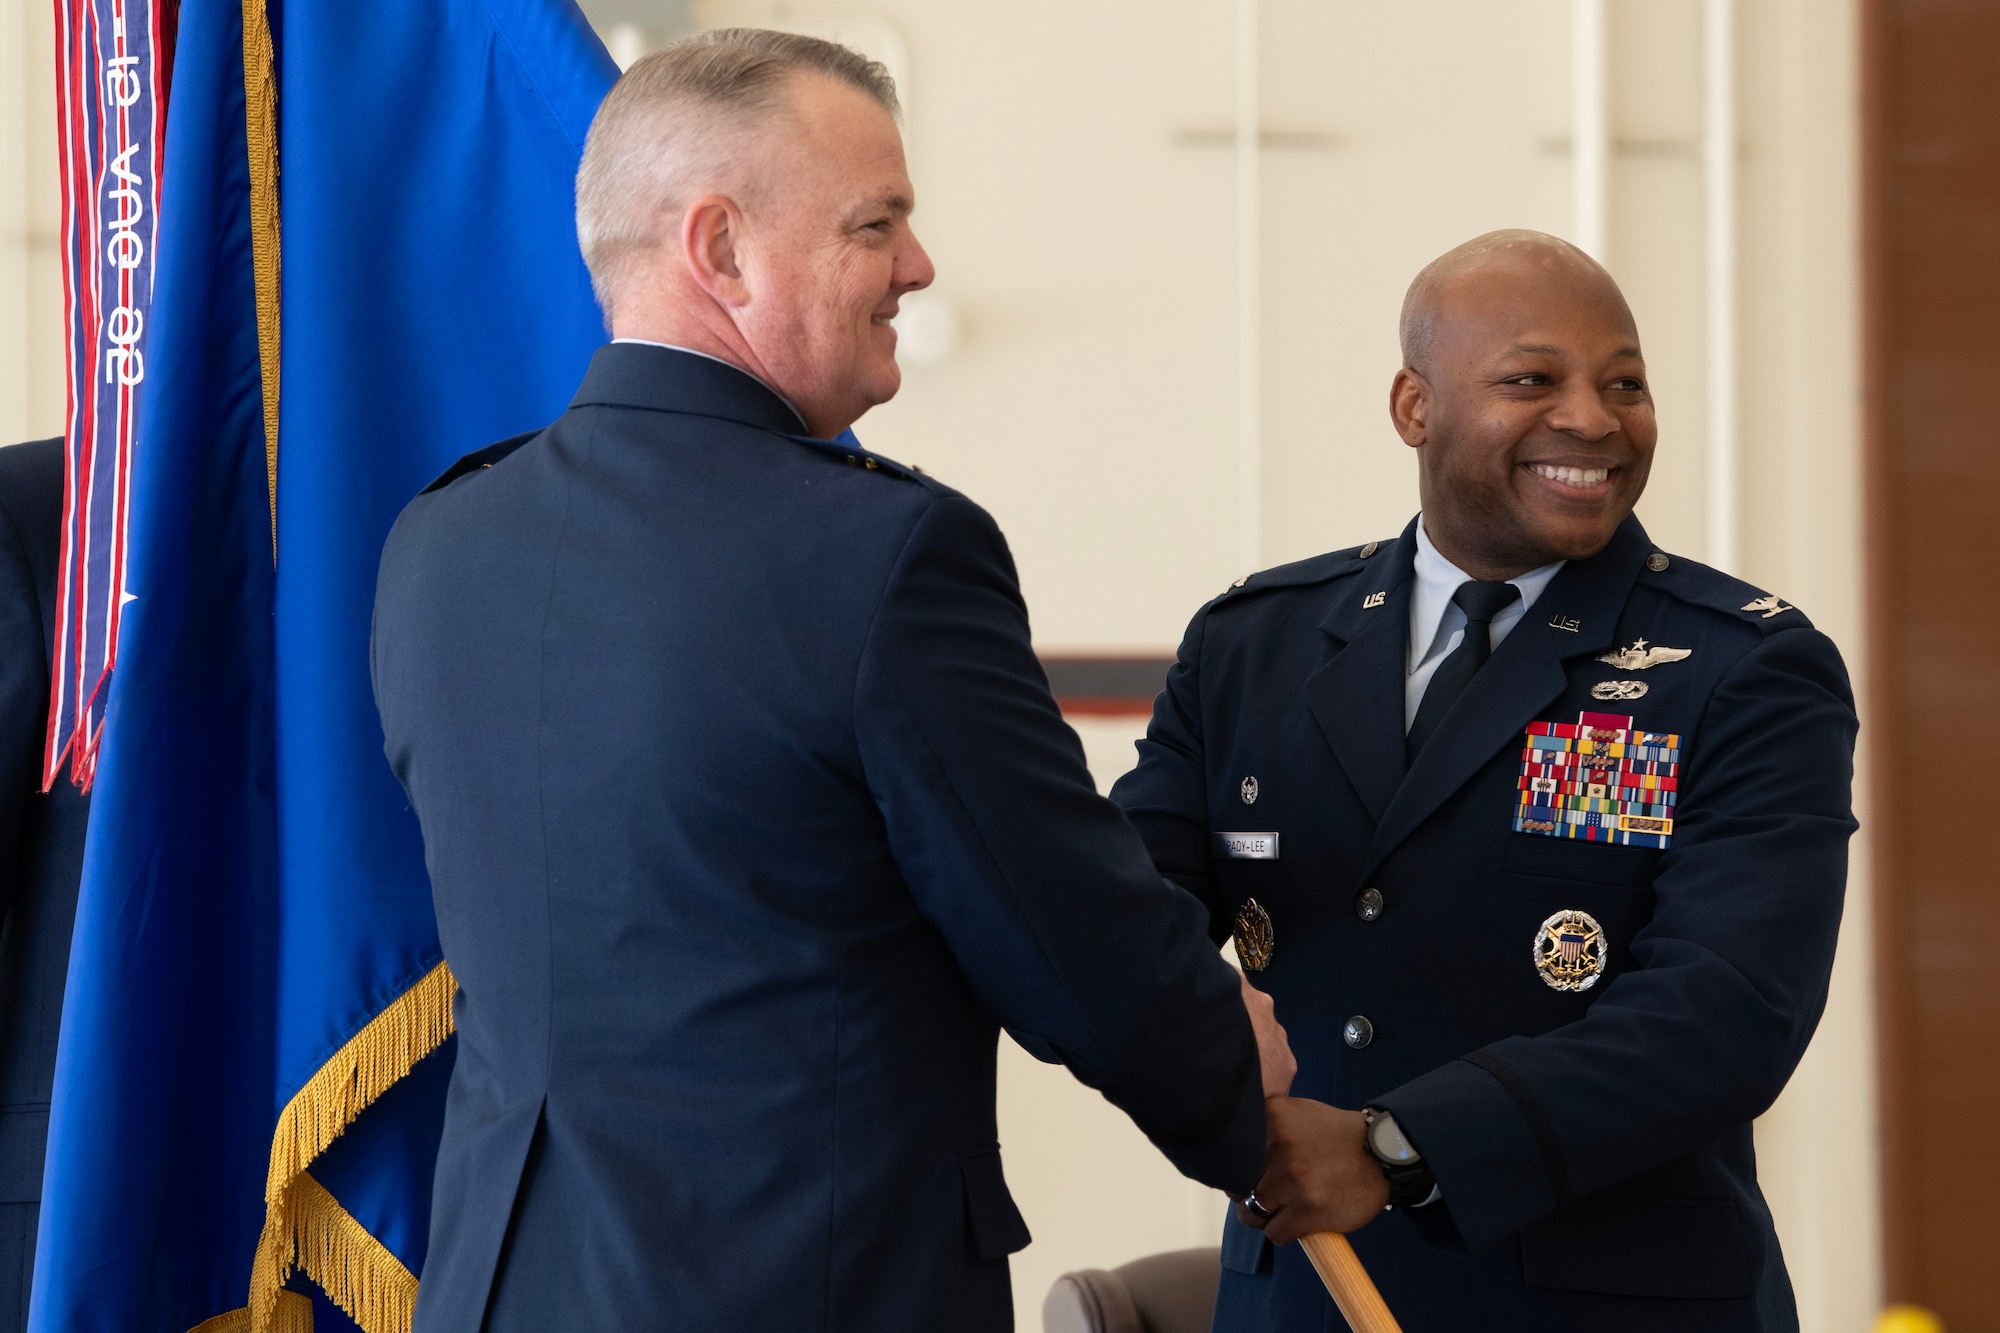 Maj. Gen. D. Scott Durham, 4th Air Force commander, passes the guidon to Col. Patrick L. Brady-Lee (right) as he assumes command of the 349th Air Mobility Wing on January 7, 2024, at Travis Air Force Base, California. (US Air Force photo by Tech. Sgt. Ryan Green)